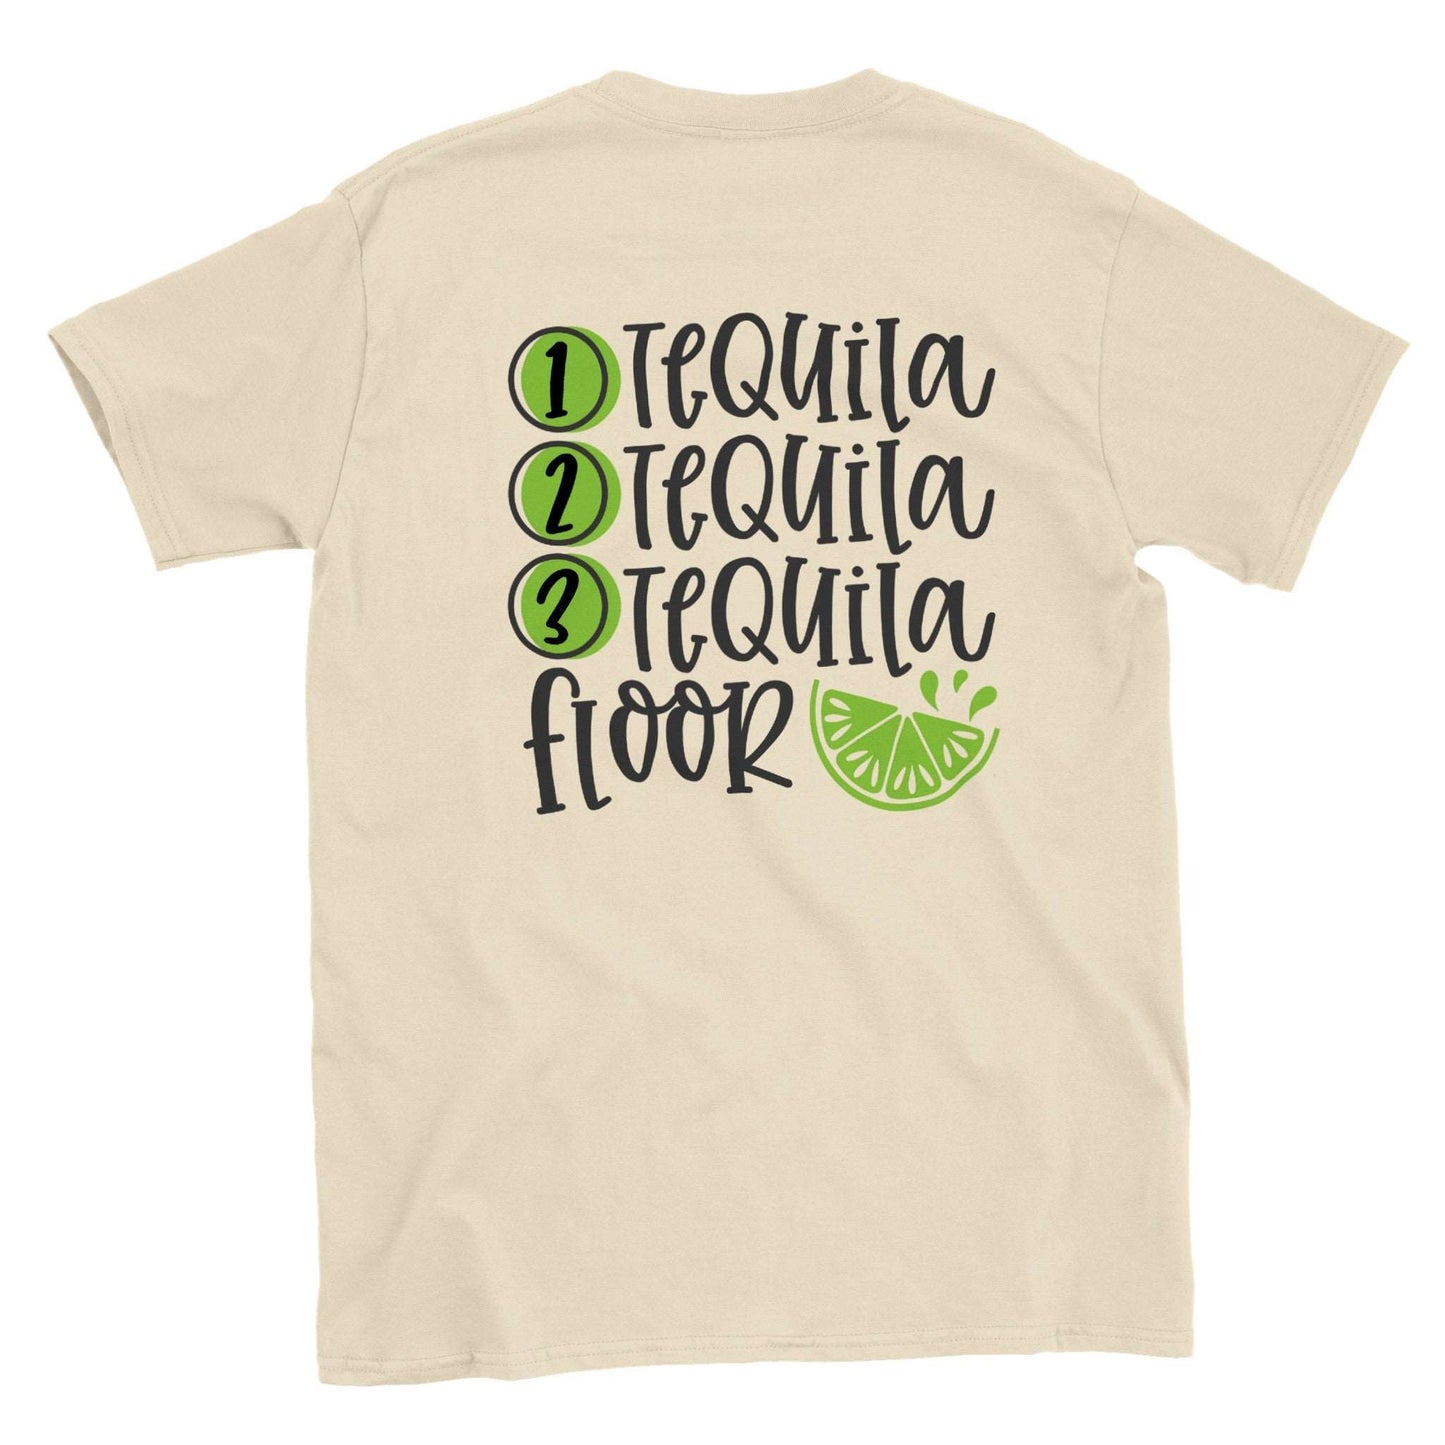 1 Tequila, 2 Tequila, 3 Tequila Floor T-shirt - Mister Snarky's